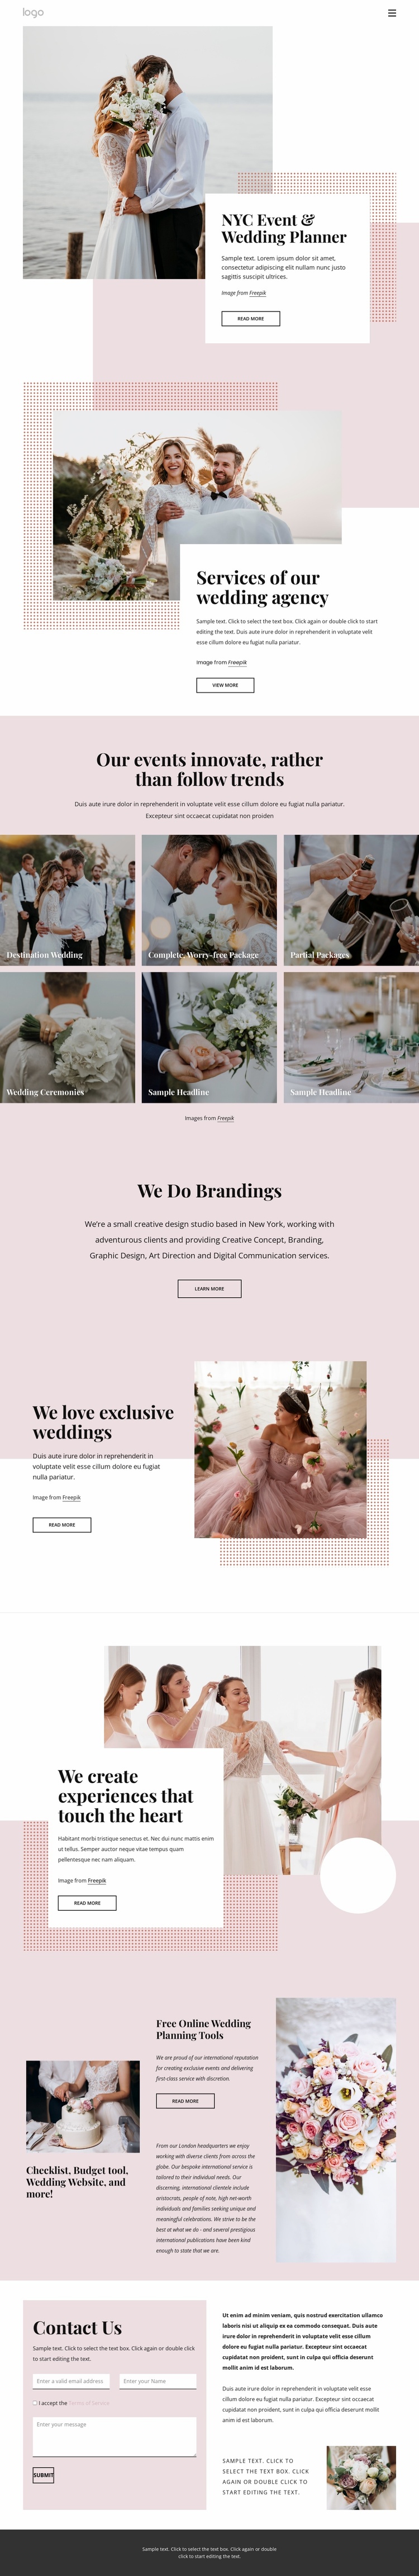 We create stress-free planning experience Website Template